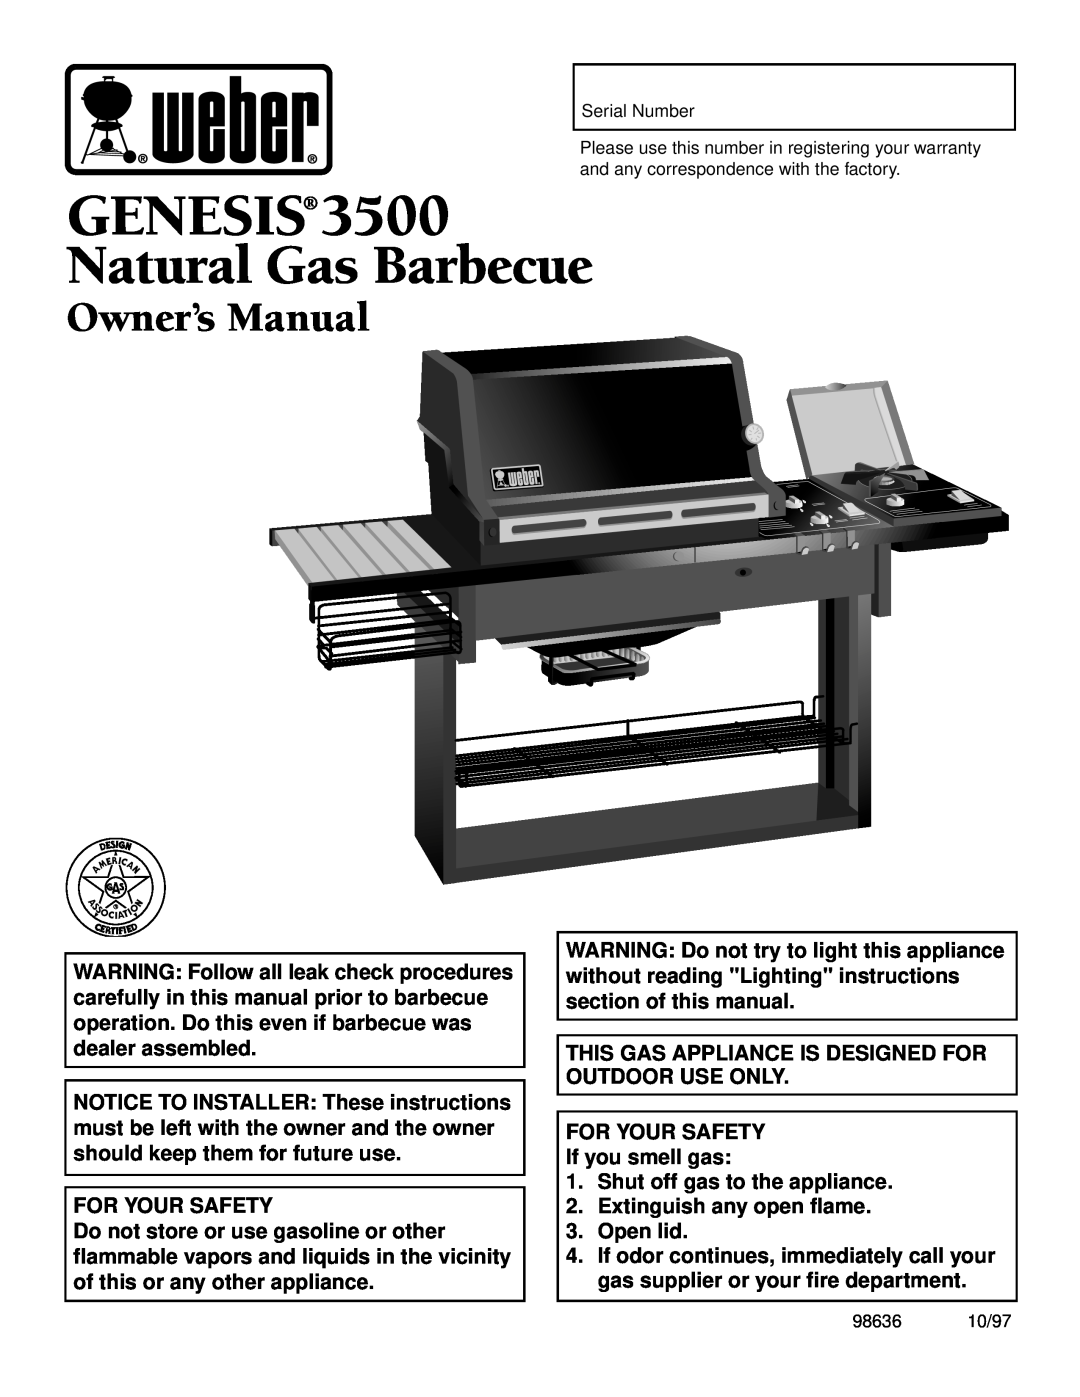 Weber 3500 owner manual Genesis, Natural Gas Barbecue, For Your Safety, FOR YOUR SAFETY If you smell gas 